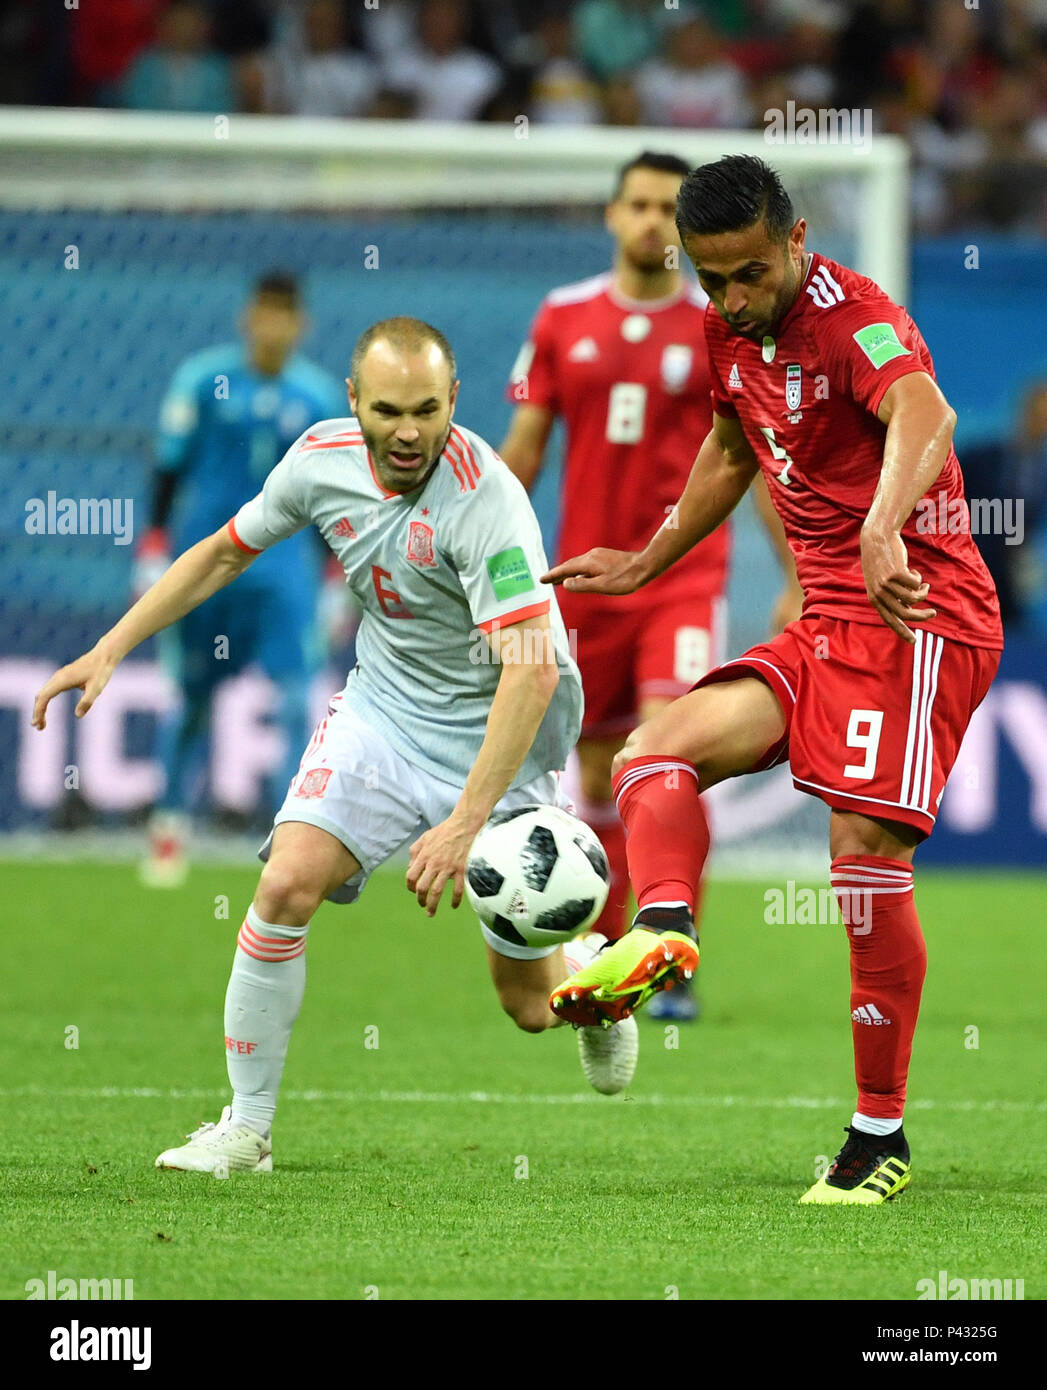 Kazan, Russia. 20th June, 2018. Andres Iniesta (L) of Spain vies with Omid Ebrahimi of Iran during a Group B match between Spain and Iran at the 2018 FIFA World Cup in Kazan, Russia, June 20, 2018. Credit: Liu Dawei/Xinhua/Alamy Live News Stock Photo